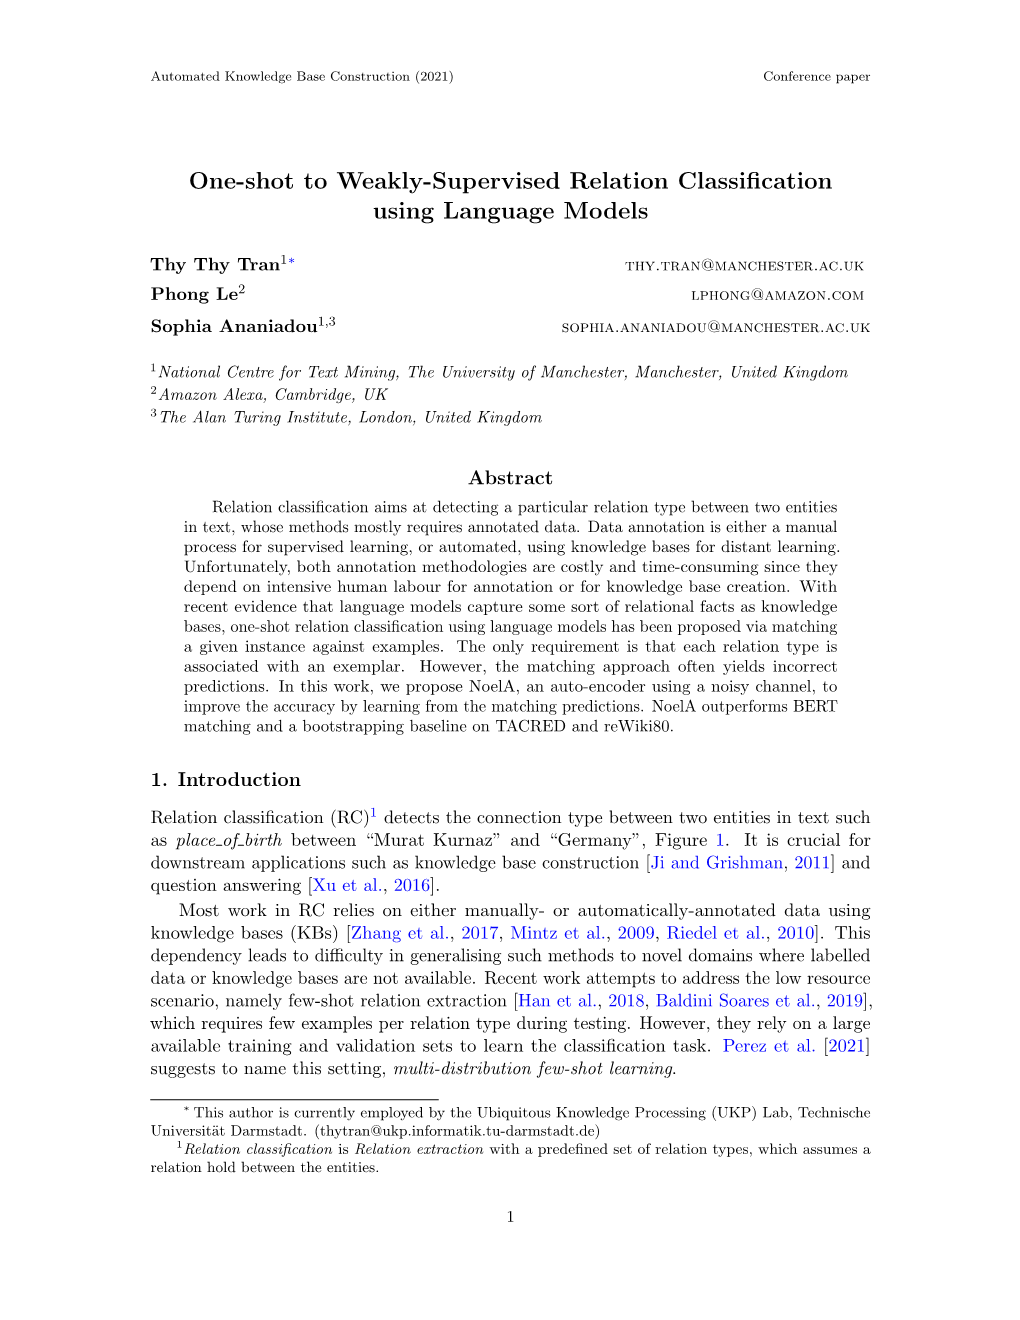 One-Shot to Weakly-Supervised Relation Classification Using Language Models